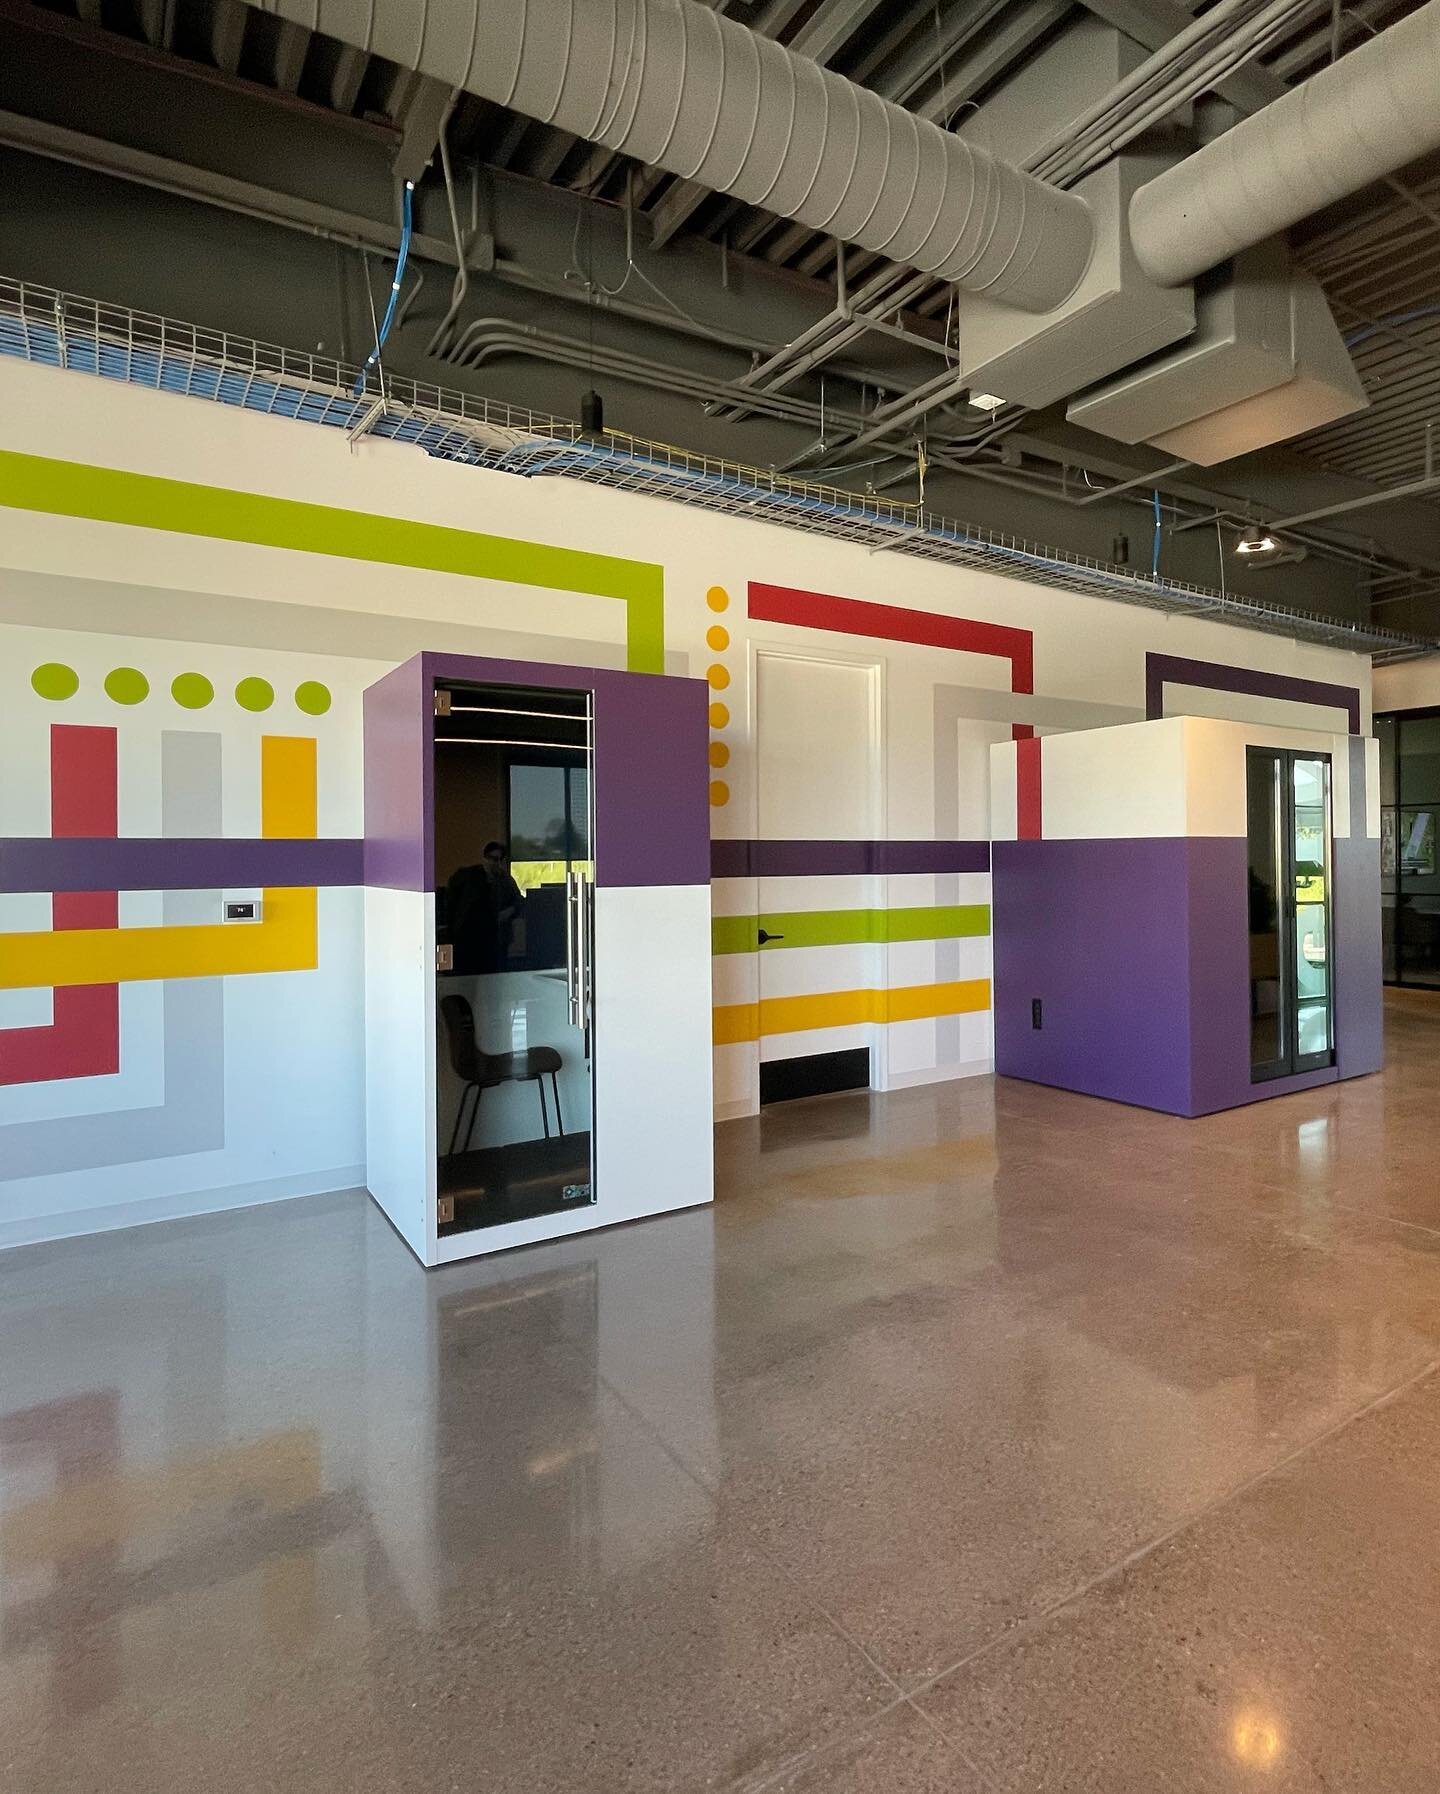 ➡️ for the before. 

For this wall we wanted to bring in color, integrate the phone booths into the art and provide wayfinding for guests. 

I like to call this one &ldquo;Chatty Cathy&rdquo; for all those loud talkers in the office that need a place